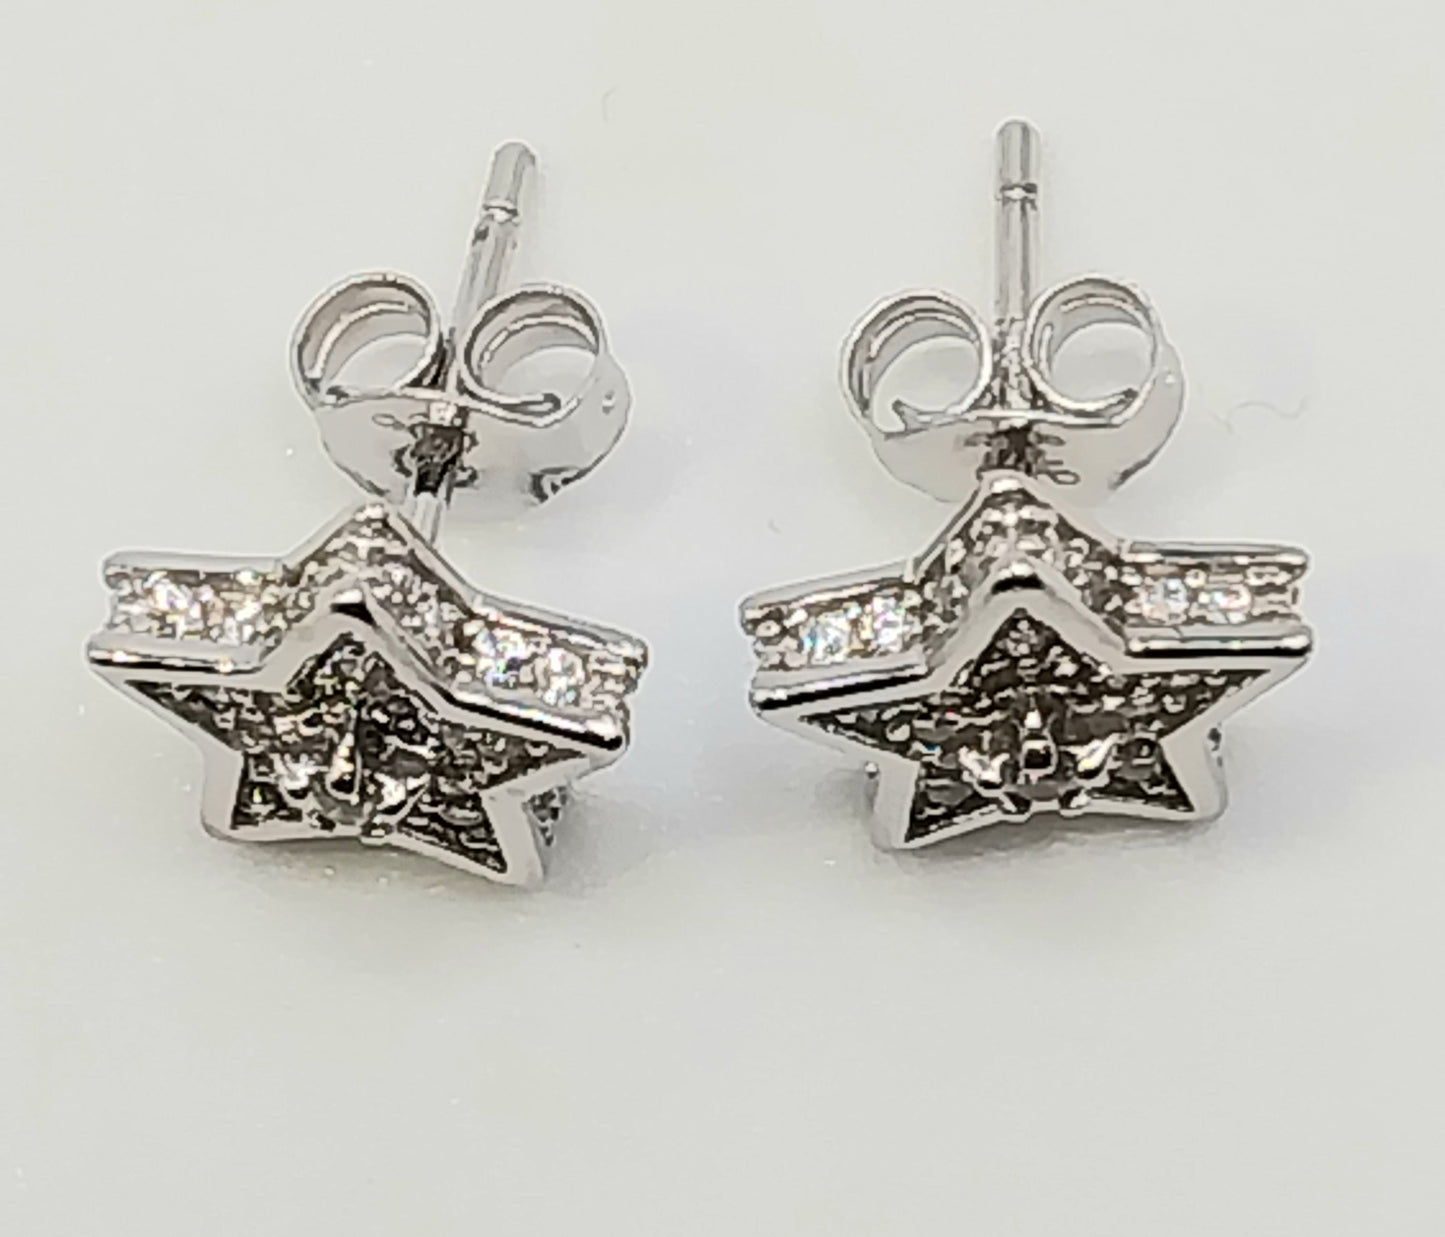 Silver 925 Star Earrings with Cubic Zirconia Studs